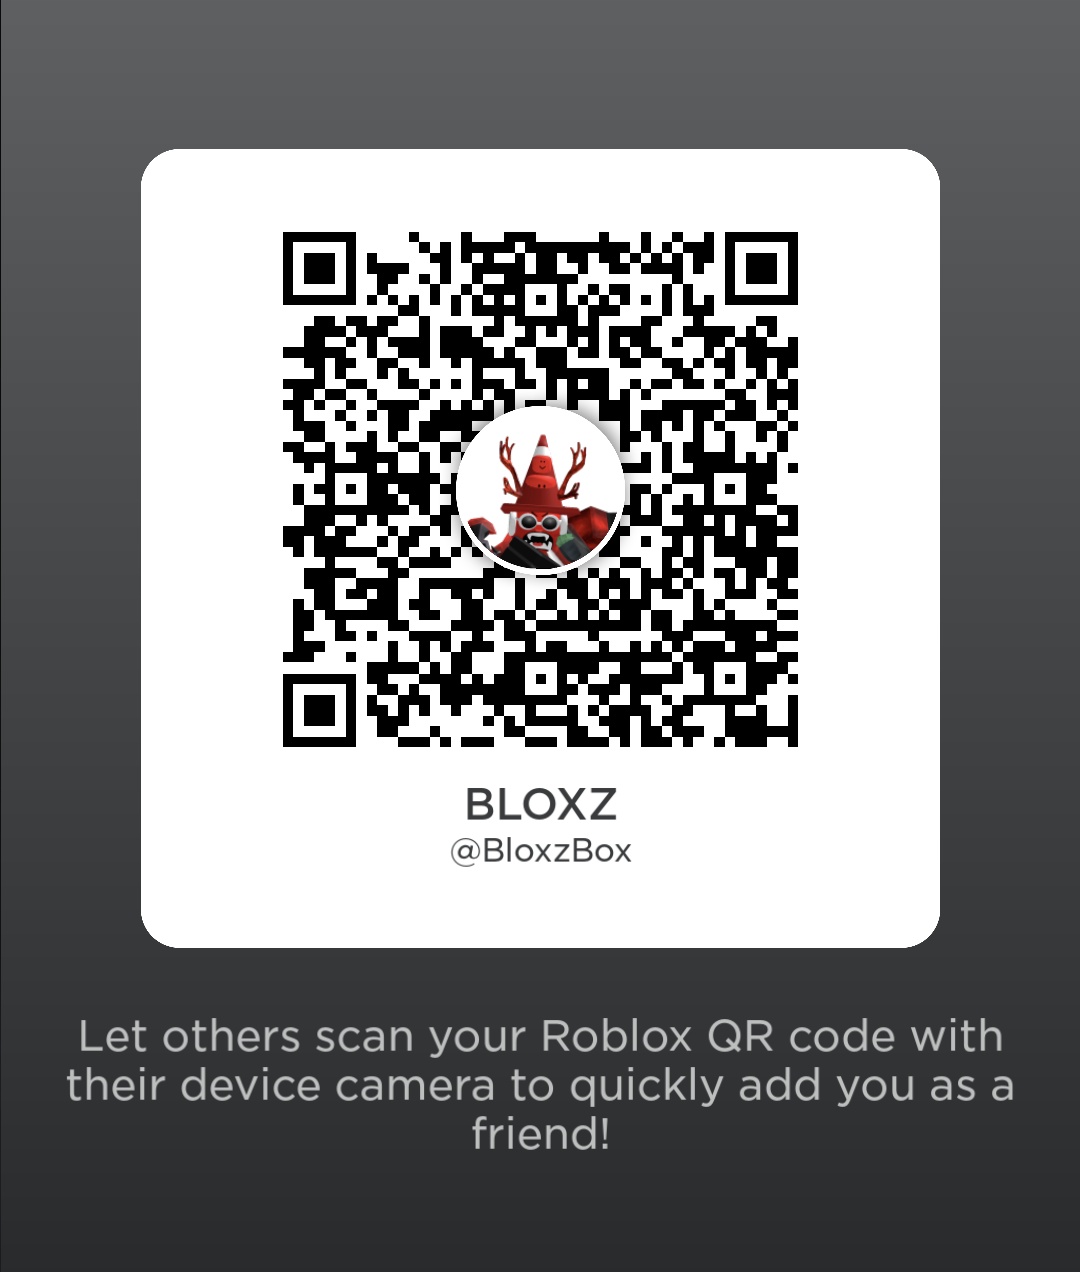 Bloxy News on X: Once you scan the QR code, you will be given a 6